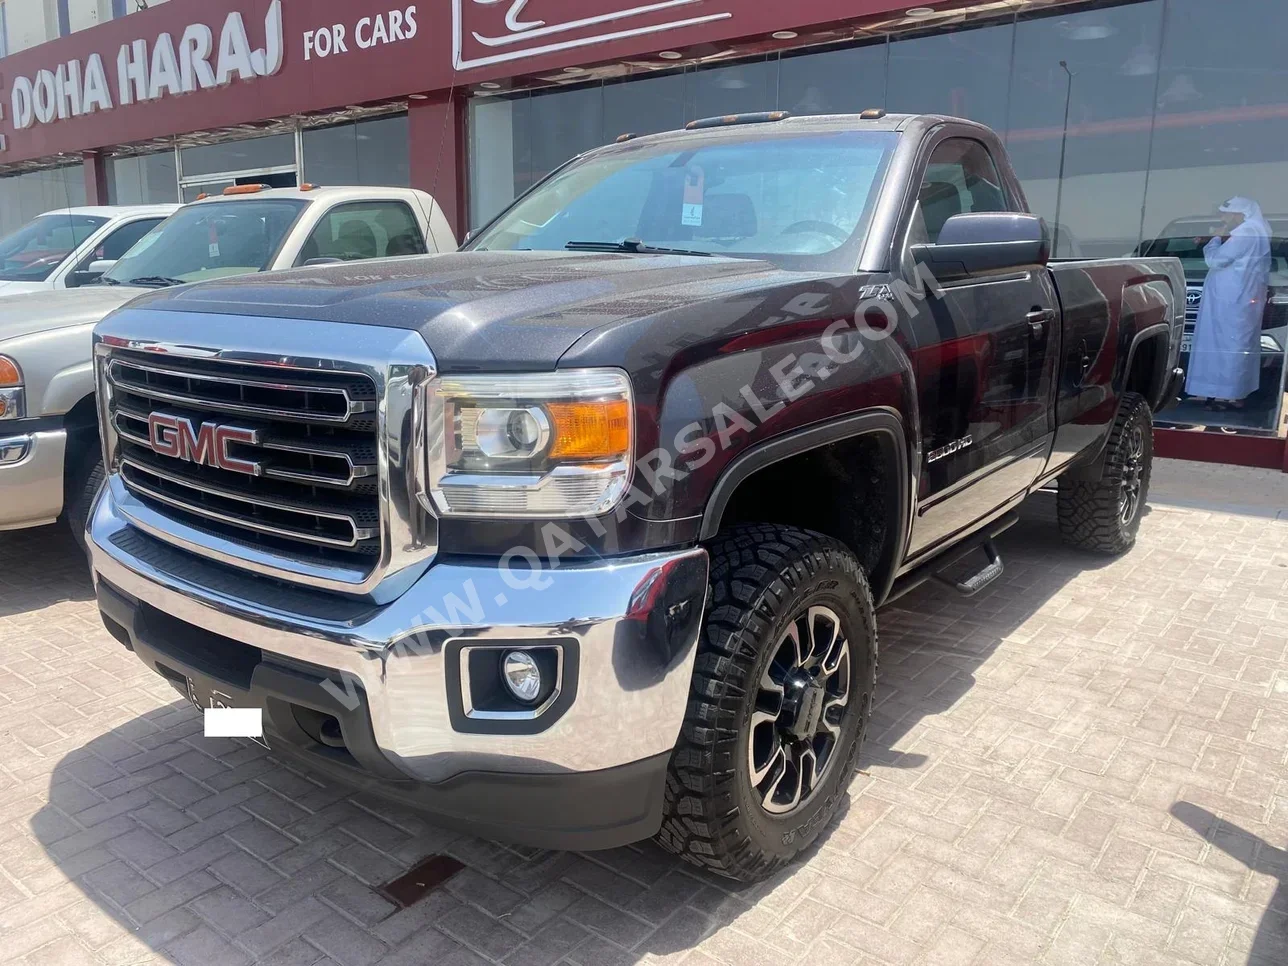 GMC  Sierra  2500 HD  2015  Automatic  139,000 Km  8 Cylinder  Four Wheel Drive (4WD)  Pick Up  Brown